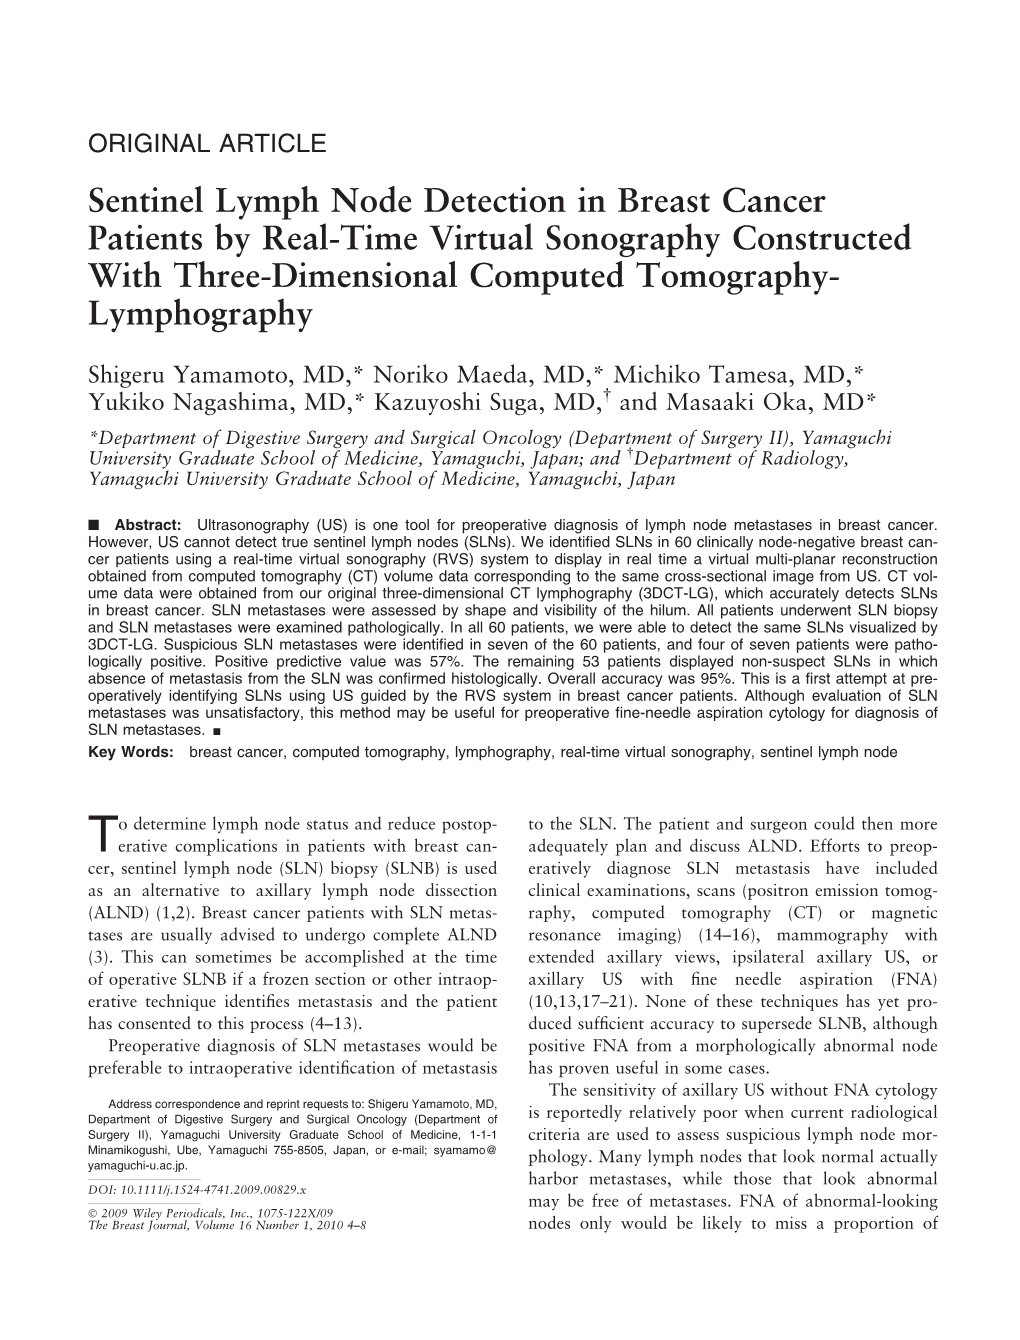 Sentinel Lymph Node Detection in Breast Cancer Patients by Real-Time Virtual Sonography Constructed with Three-Dimensional Computed Tomography- Lymphography